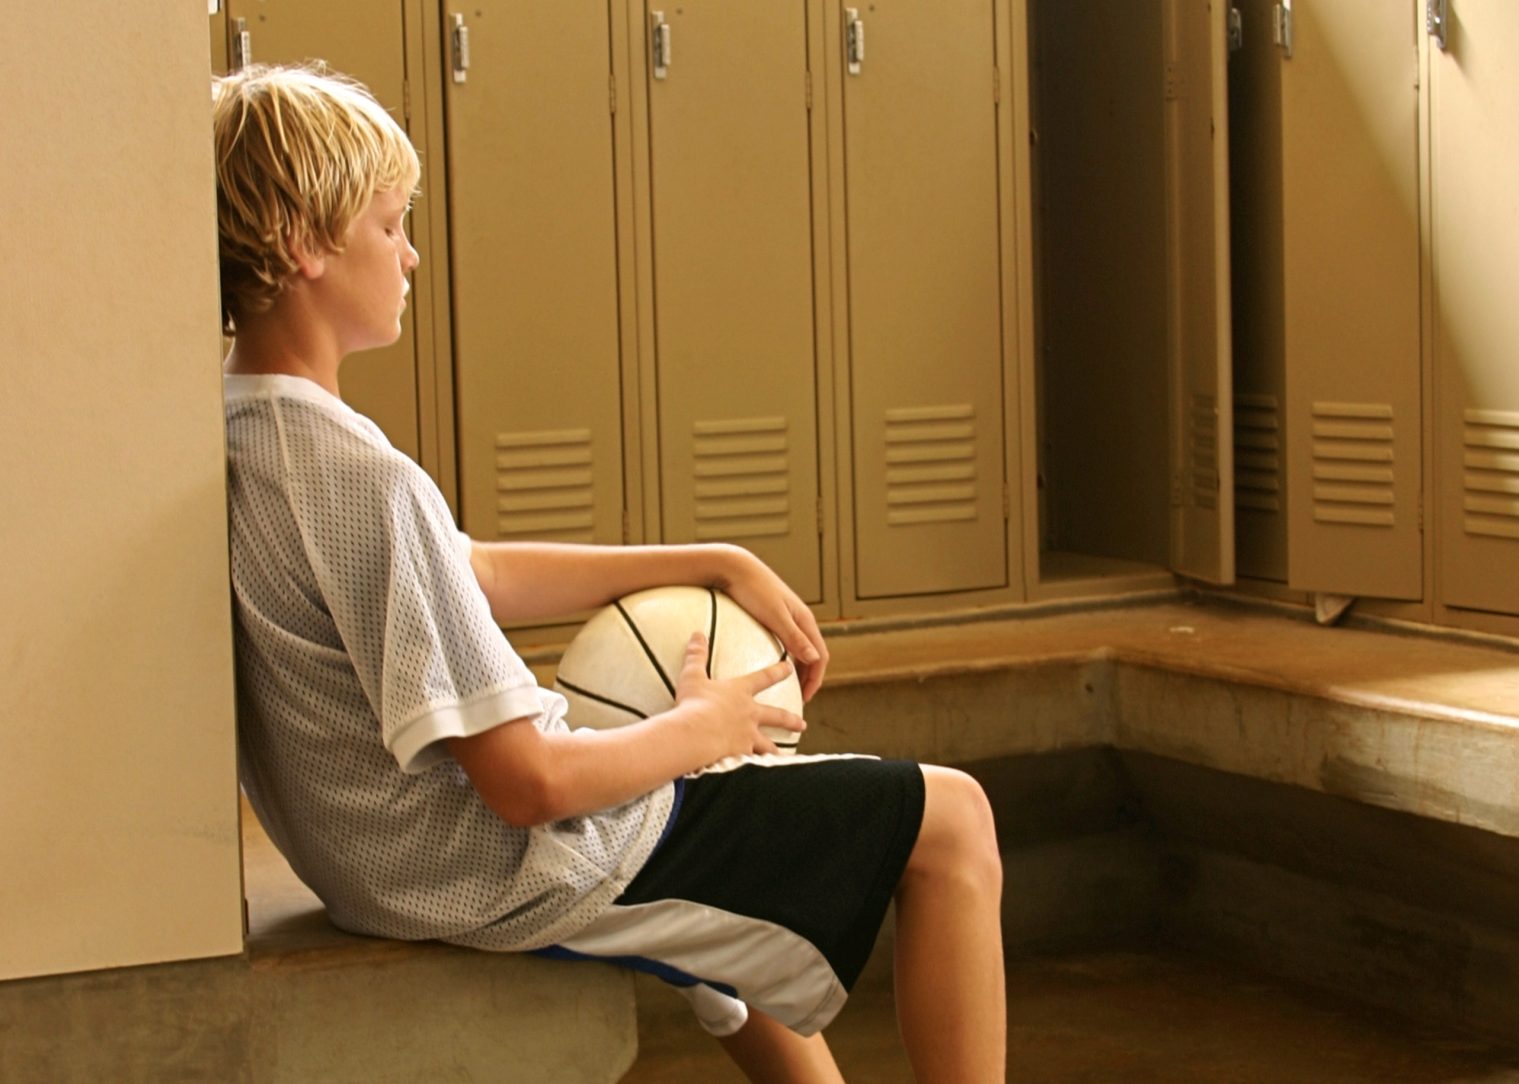 The 4 Biggest Problems in Youth Sports Today